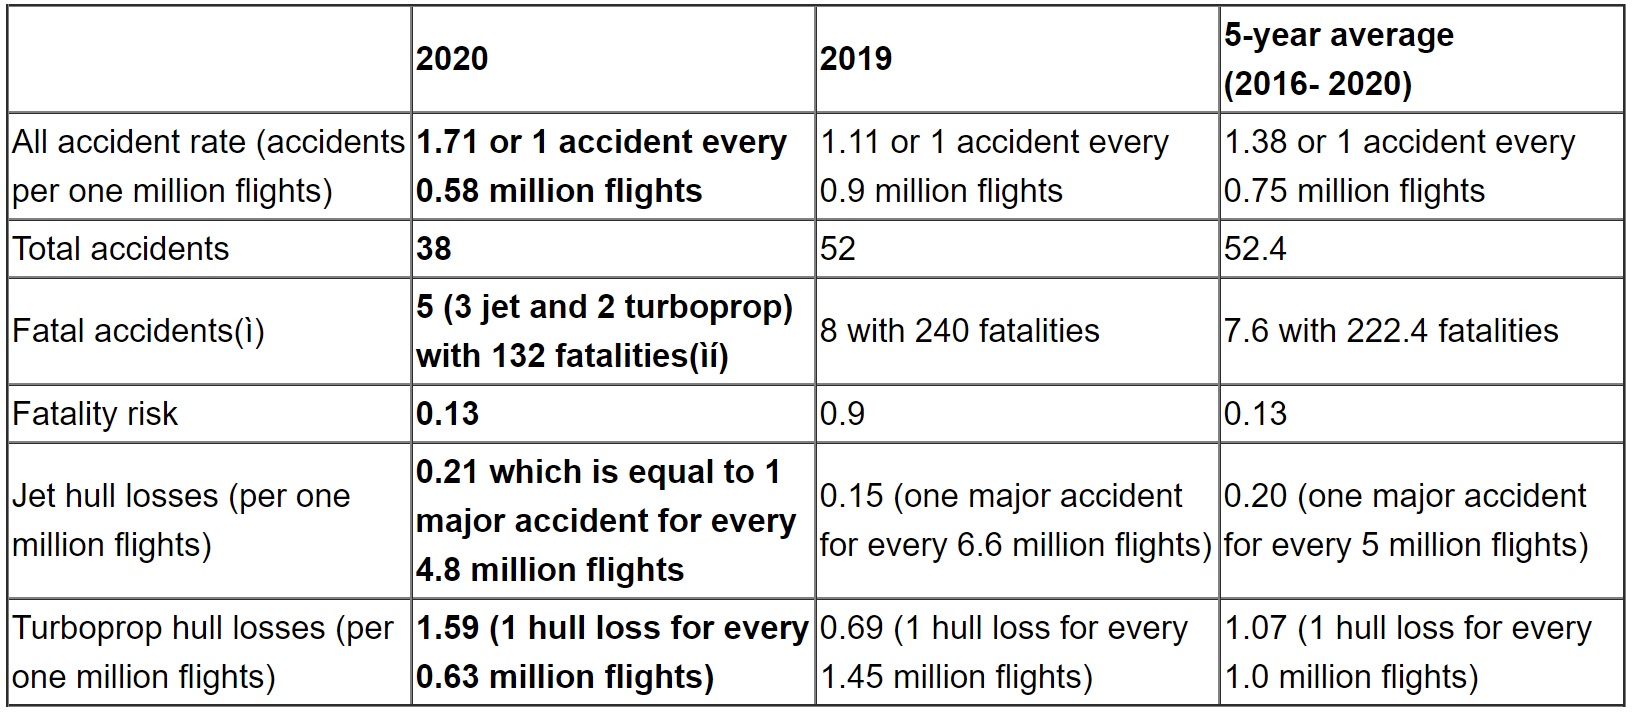 According to IATA's 2020 Safety Report,  the total number of accidents in commercial aviation decreased from 52 in 2019 to 38 in 2020, and the total number of fatal accidents decreased from 8 in 2019 to 5 in 2020. The all accident rate was 1.71 accidents per million flights, higher than the 5-year (2016-2020) average rate which is 1.38 accidents per million flights.